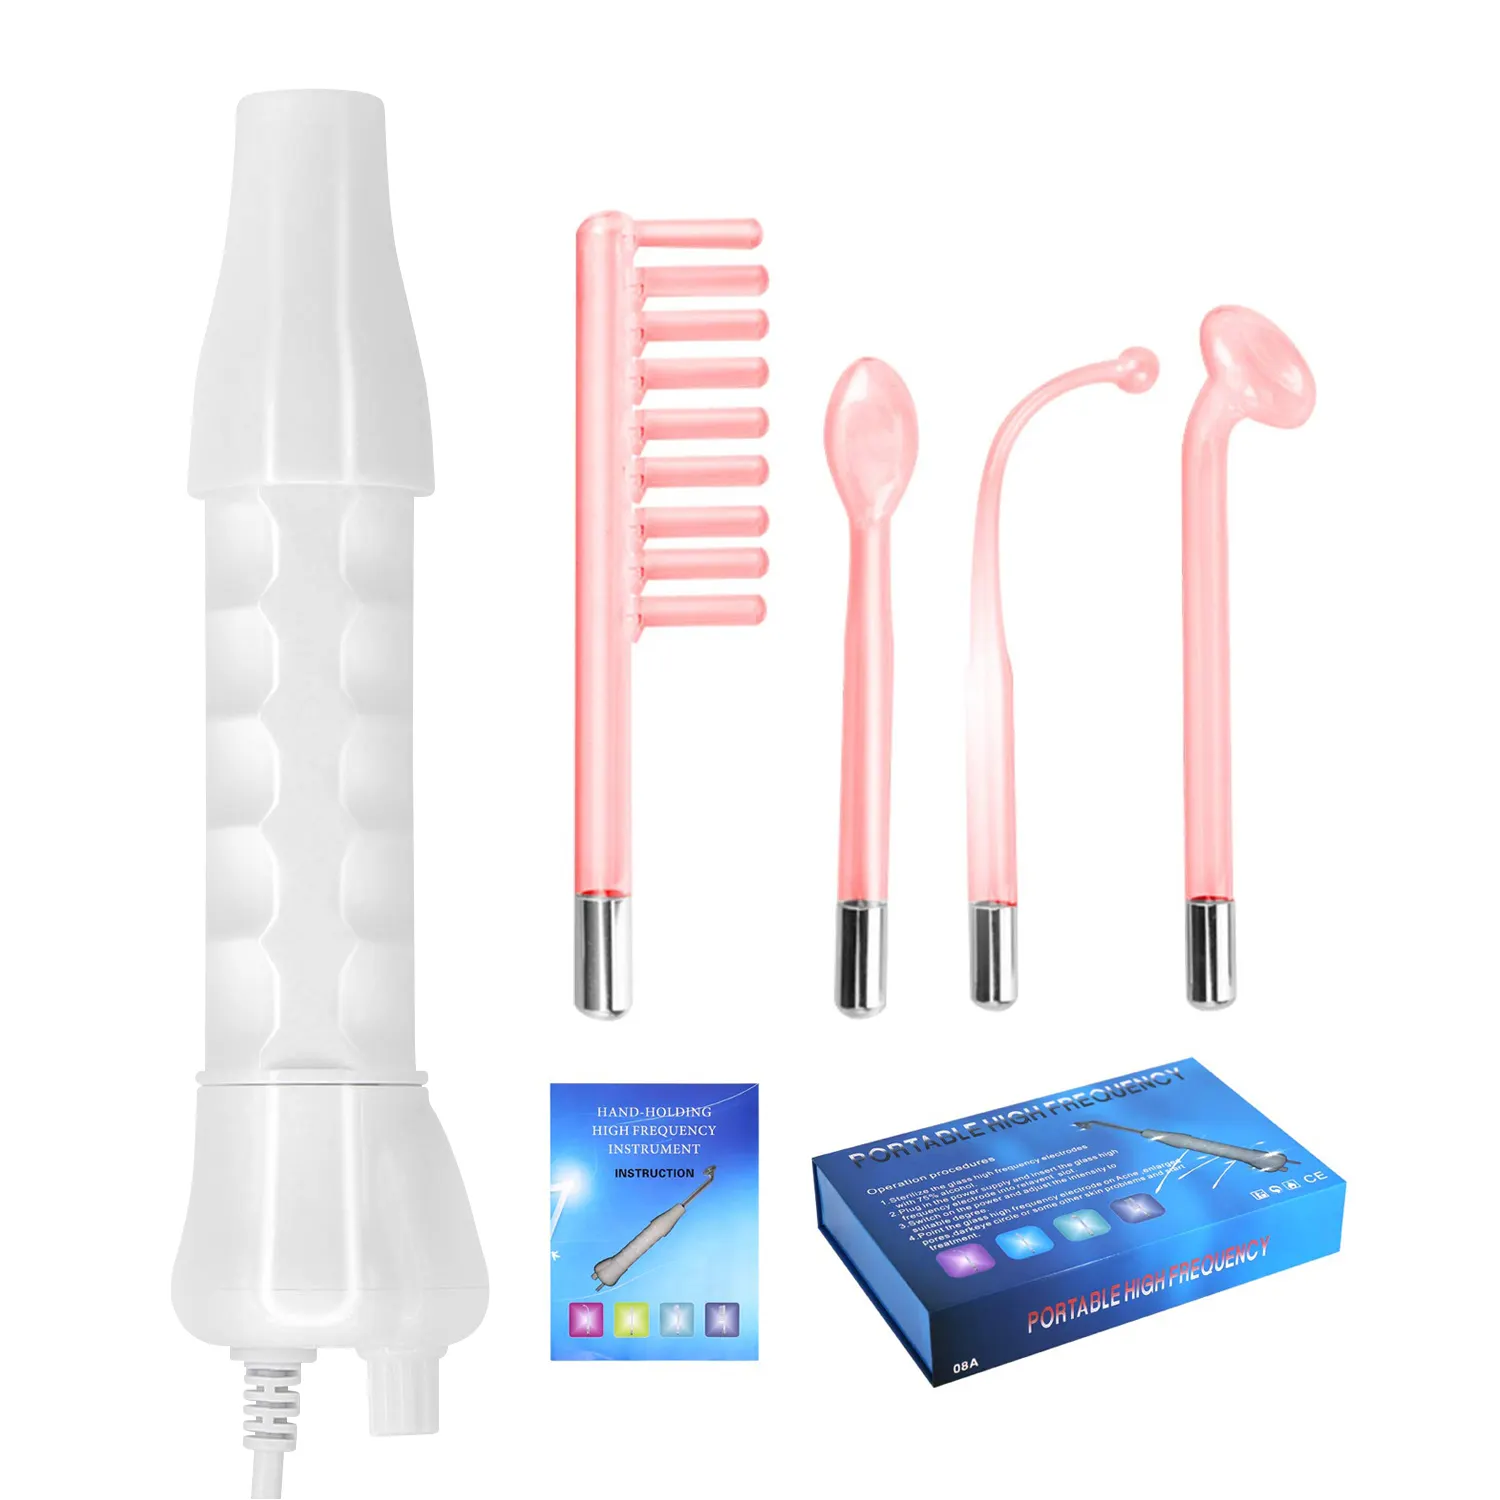 Portable Handheld High Frequency Skin Therapy Wand Electrode Glass Tube Skin Wrinkle Reducing Alta Frecuencia Wands